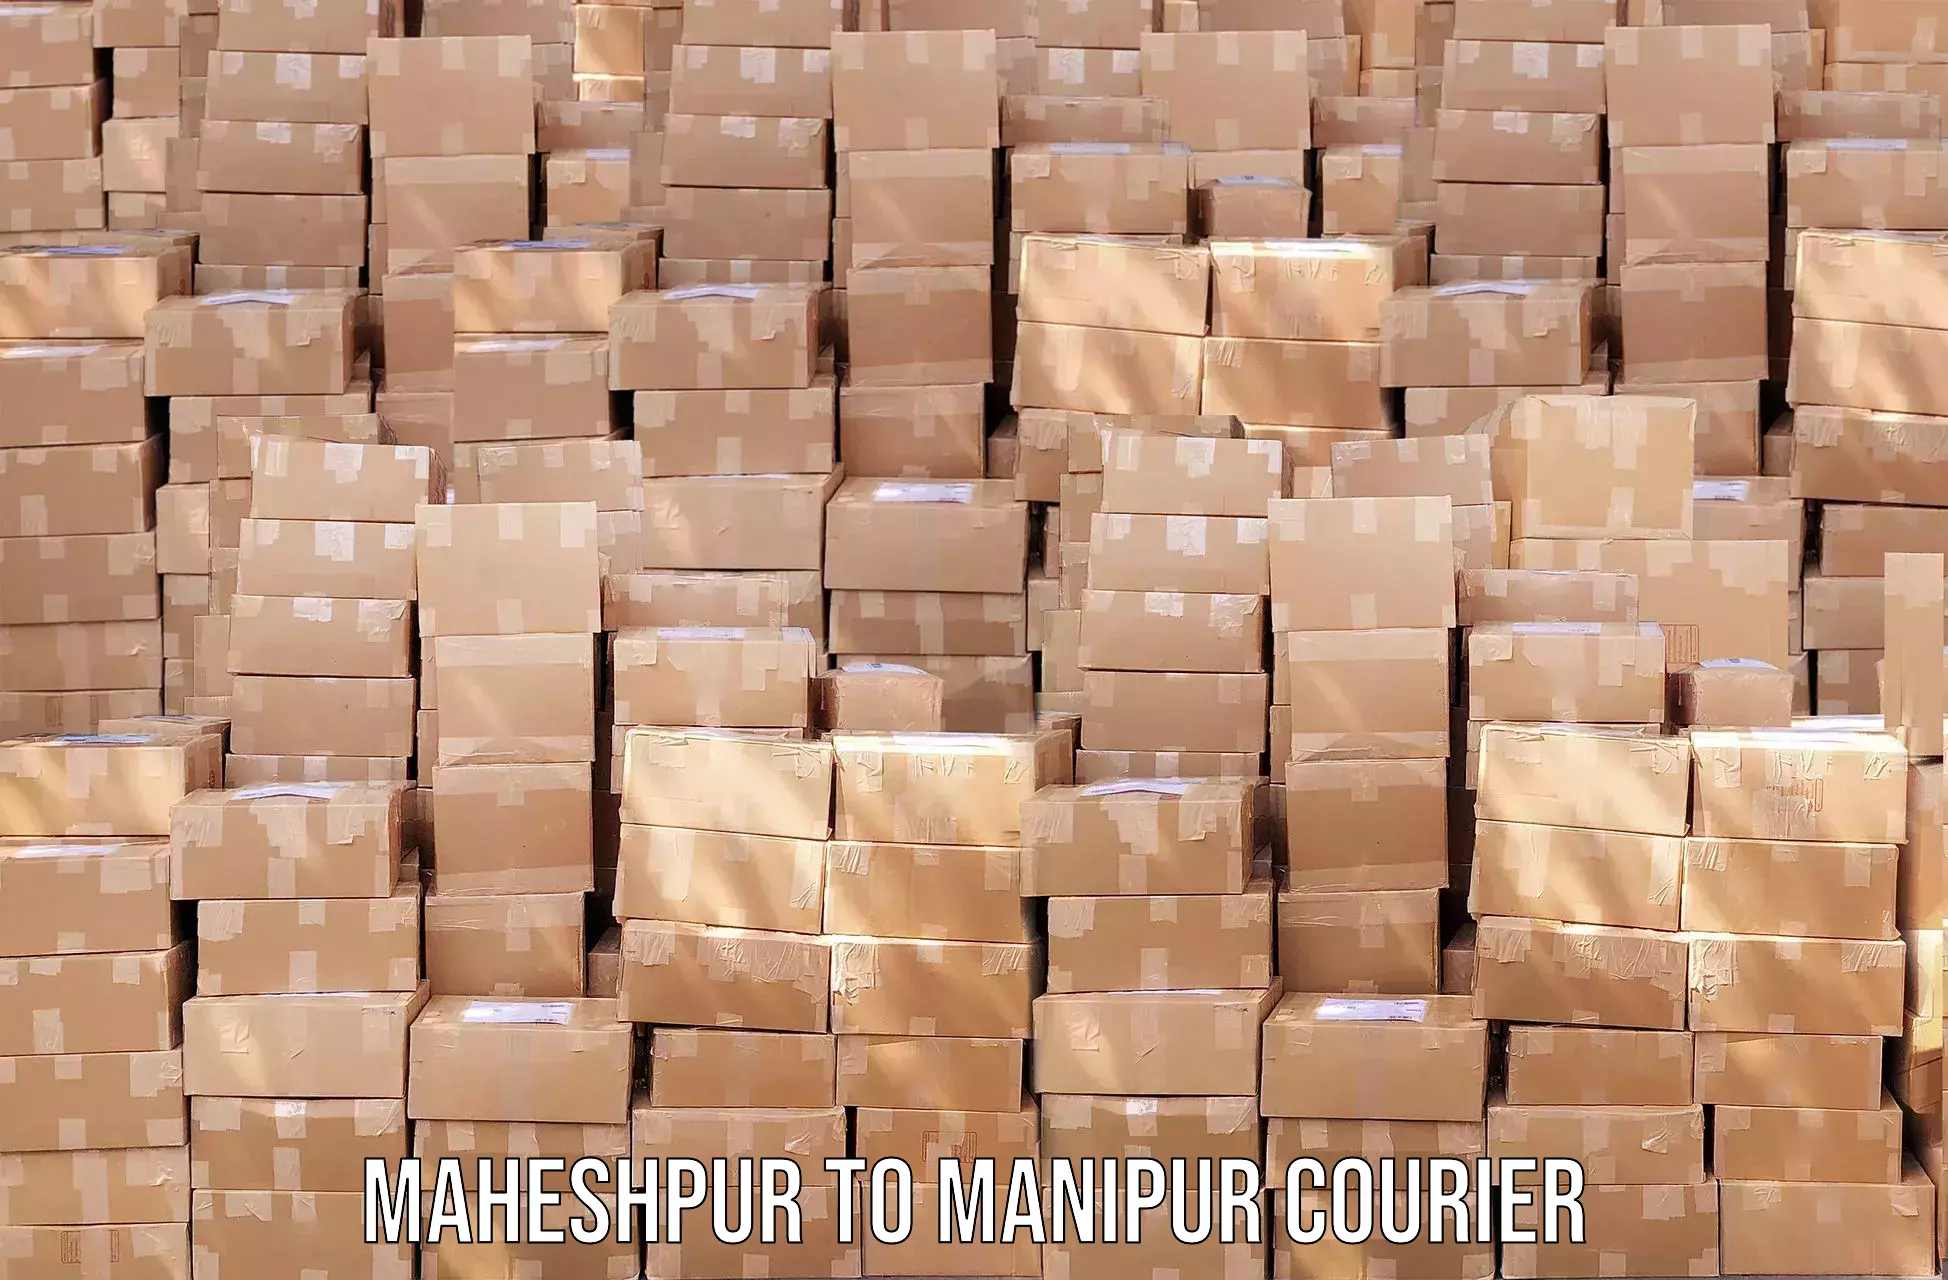 State-of-the-art courier technology Maheshpur to Manipur